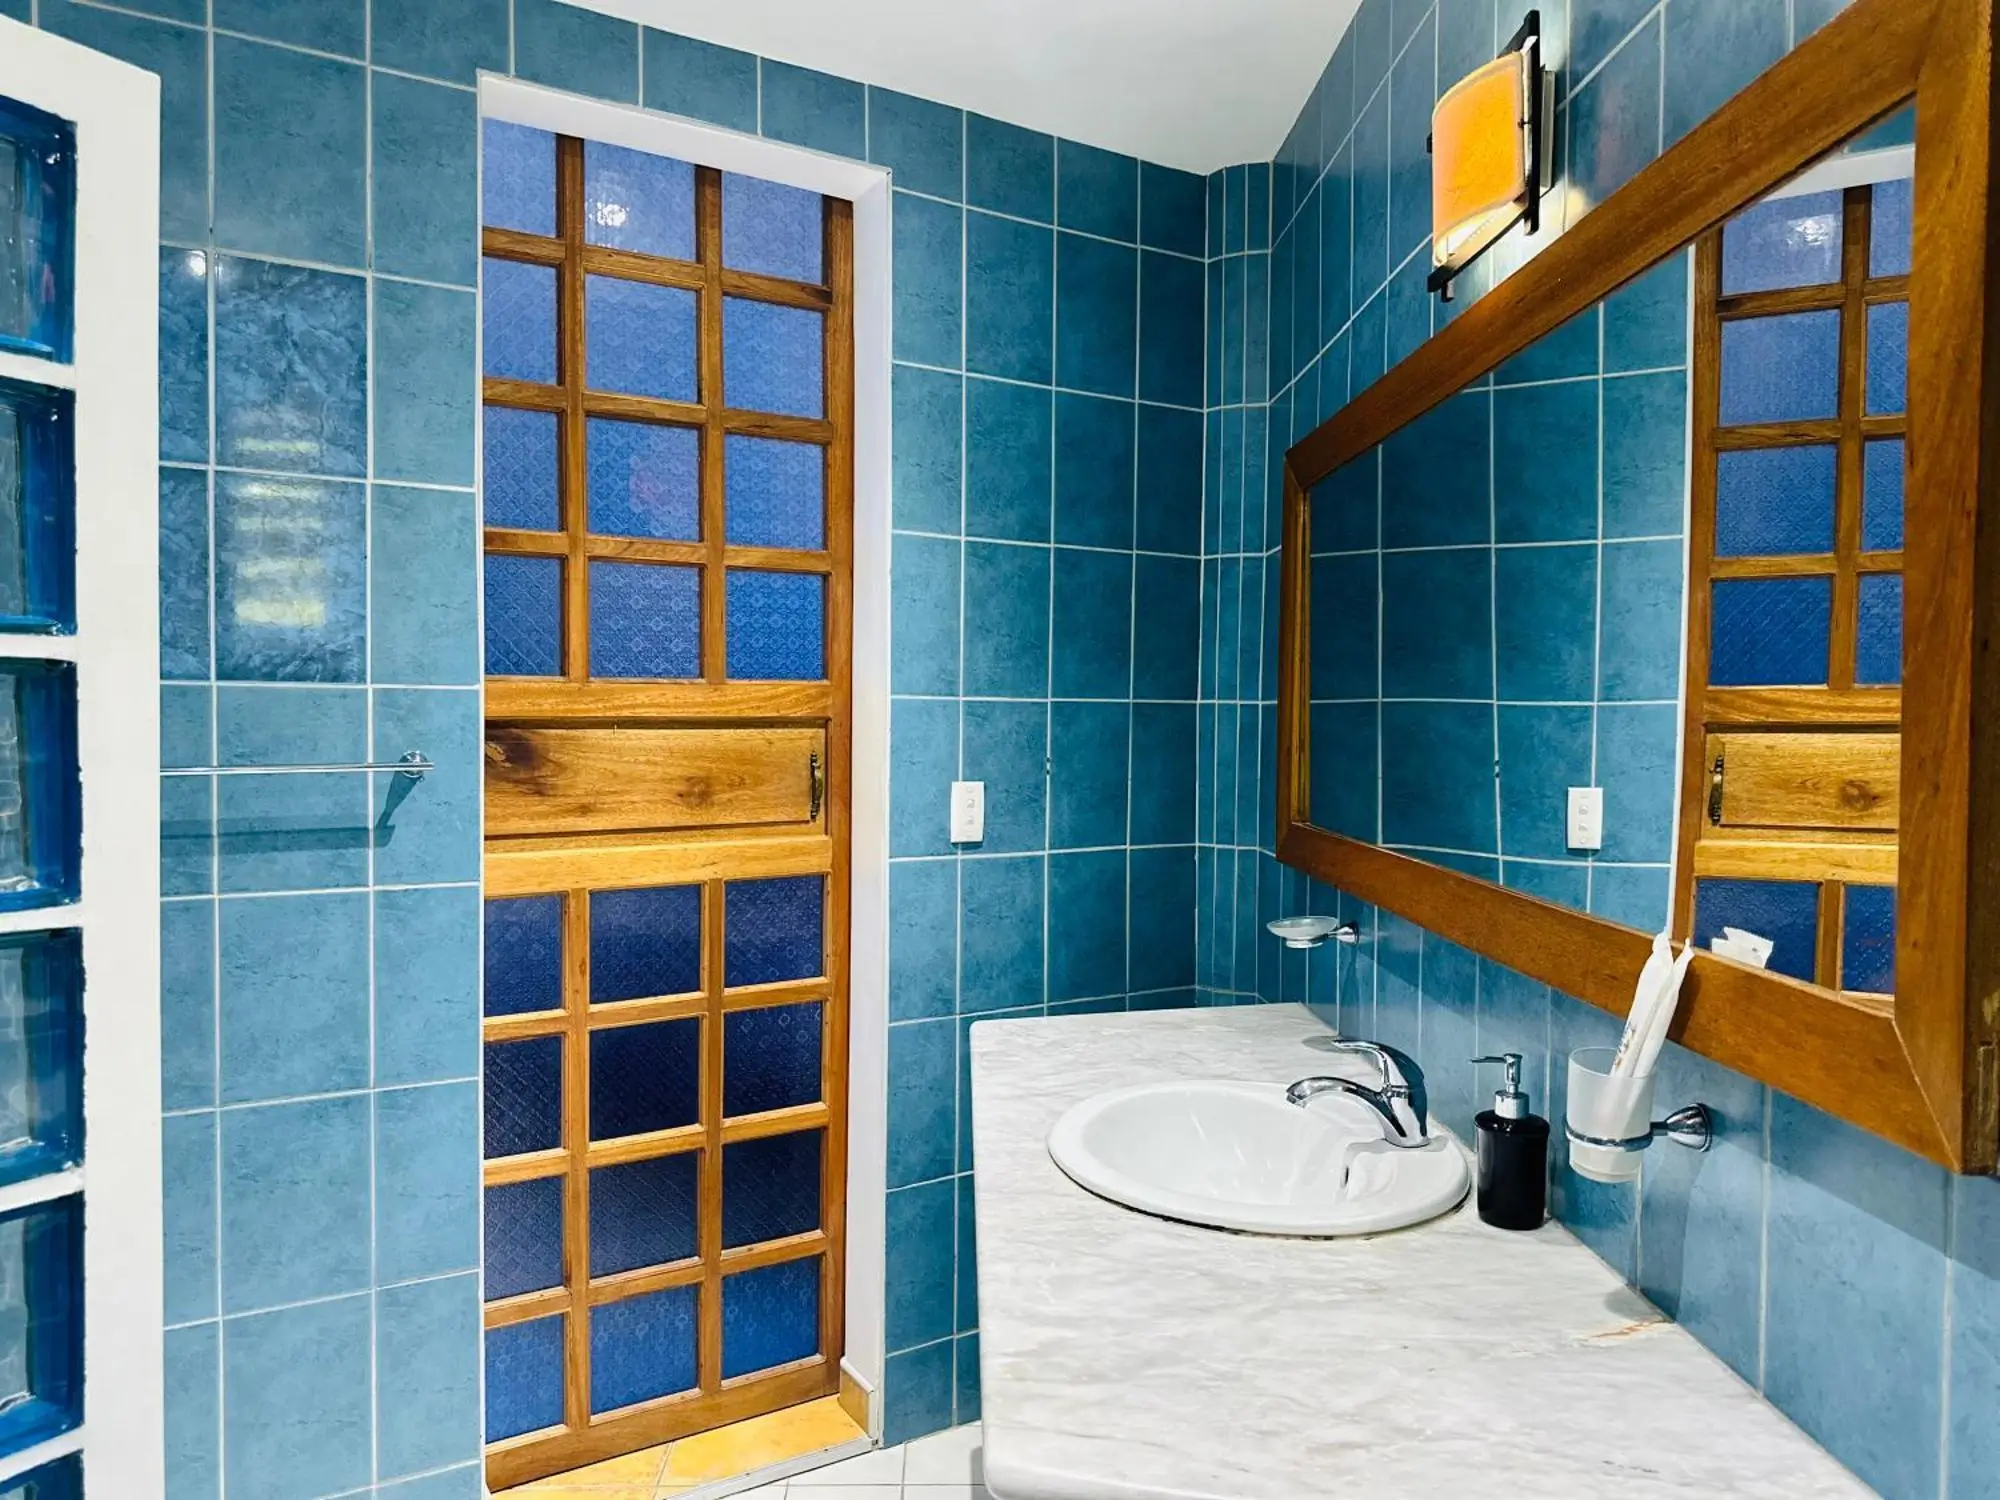 Bathroom in Aissatou Beach Resort featuring bright blue tile walls with a wooden door and frame, a white sink set on a marble countertop, and a large mirror reflecting a tastefully simple design.